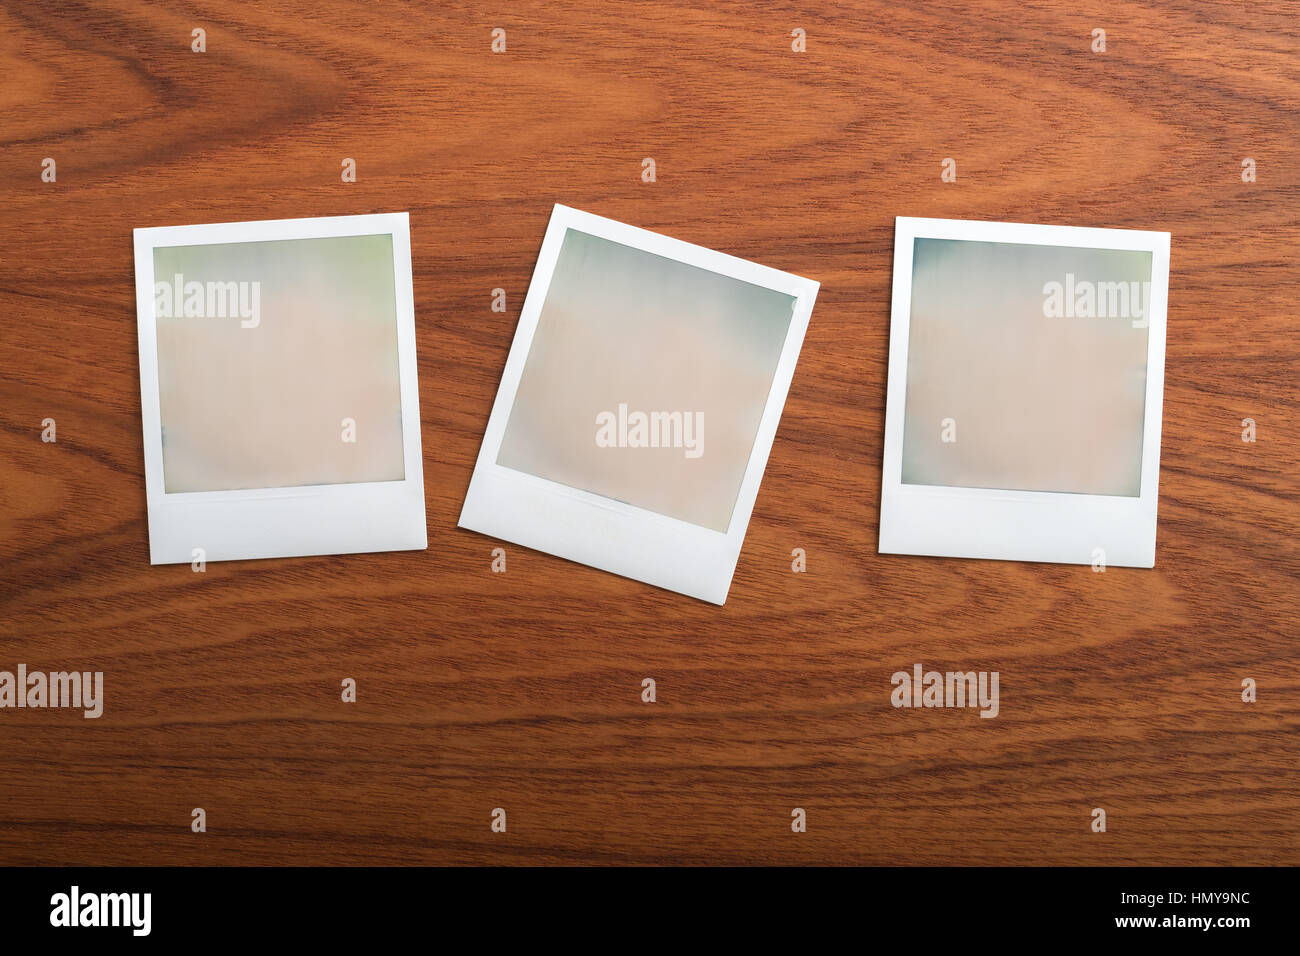 Blank instant print photographs on wooden table. Three Objects. Stock Photo